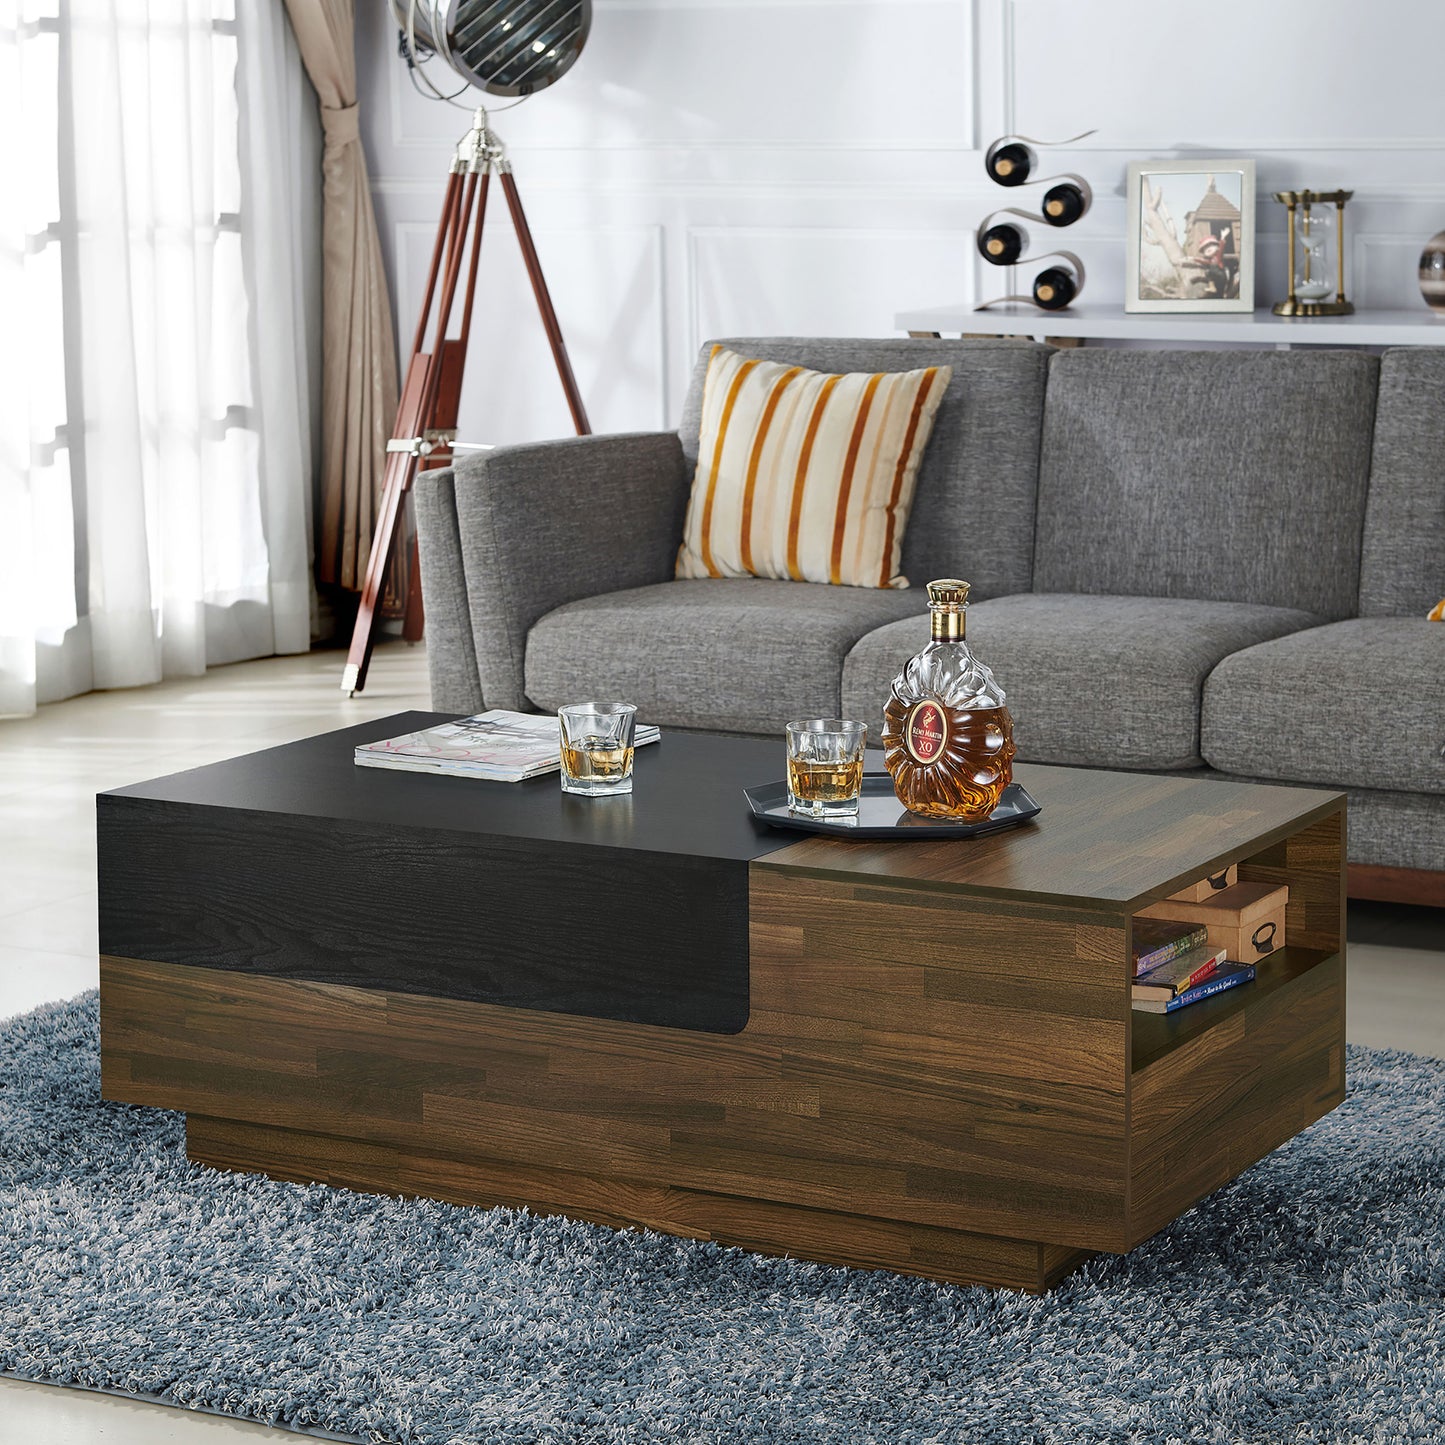 Left angled contemporary light hickory and black sliding top one-drawer coffee table in a living room with accessories